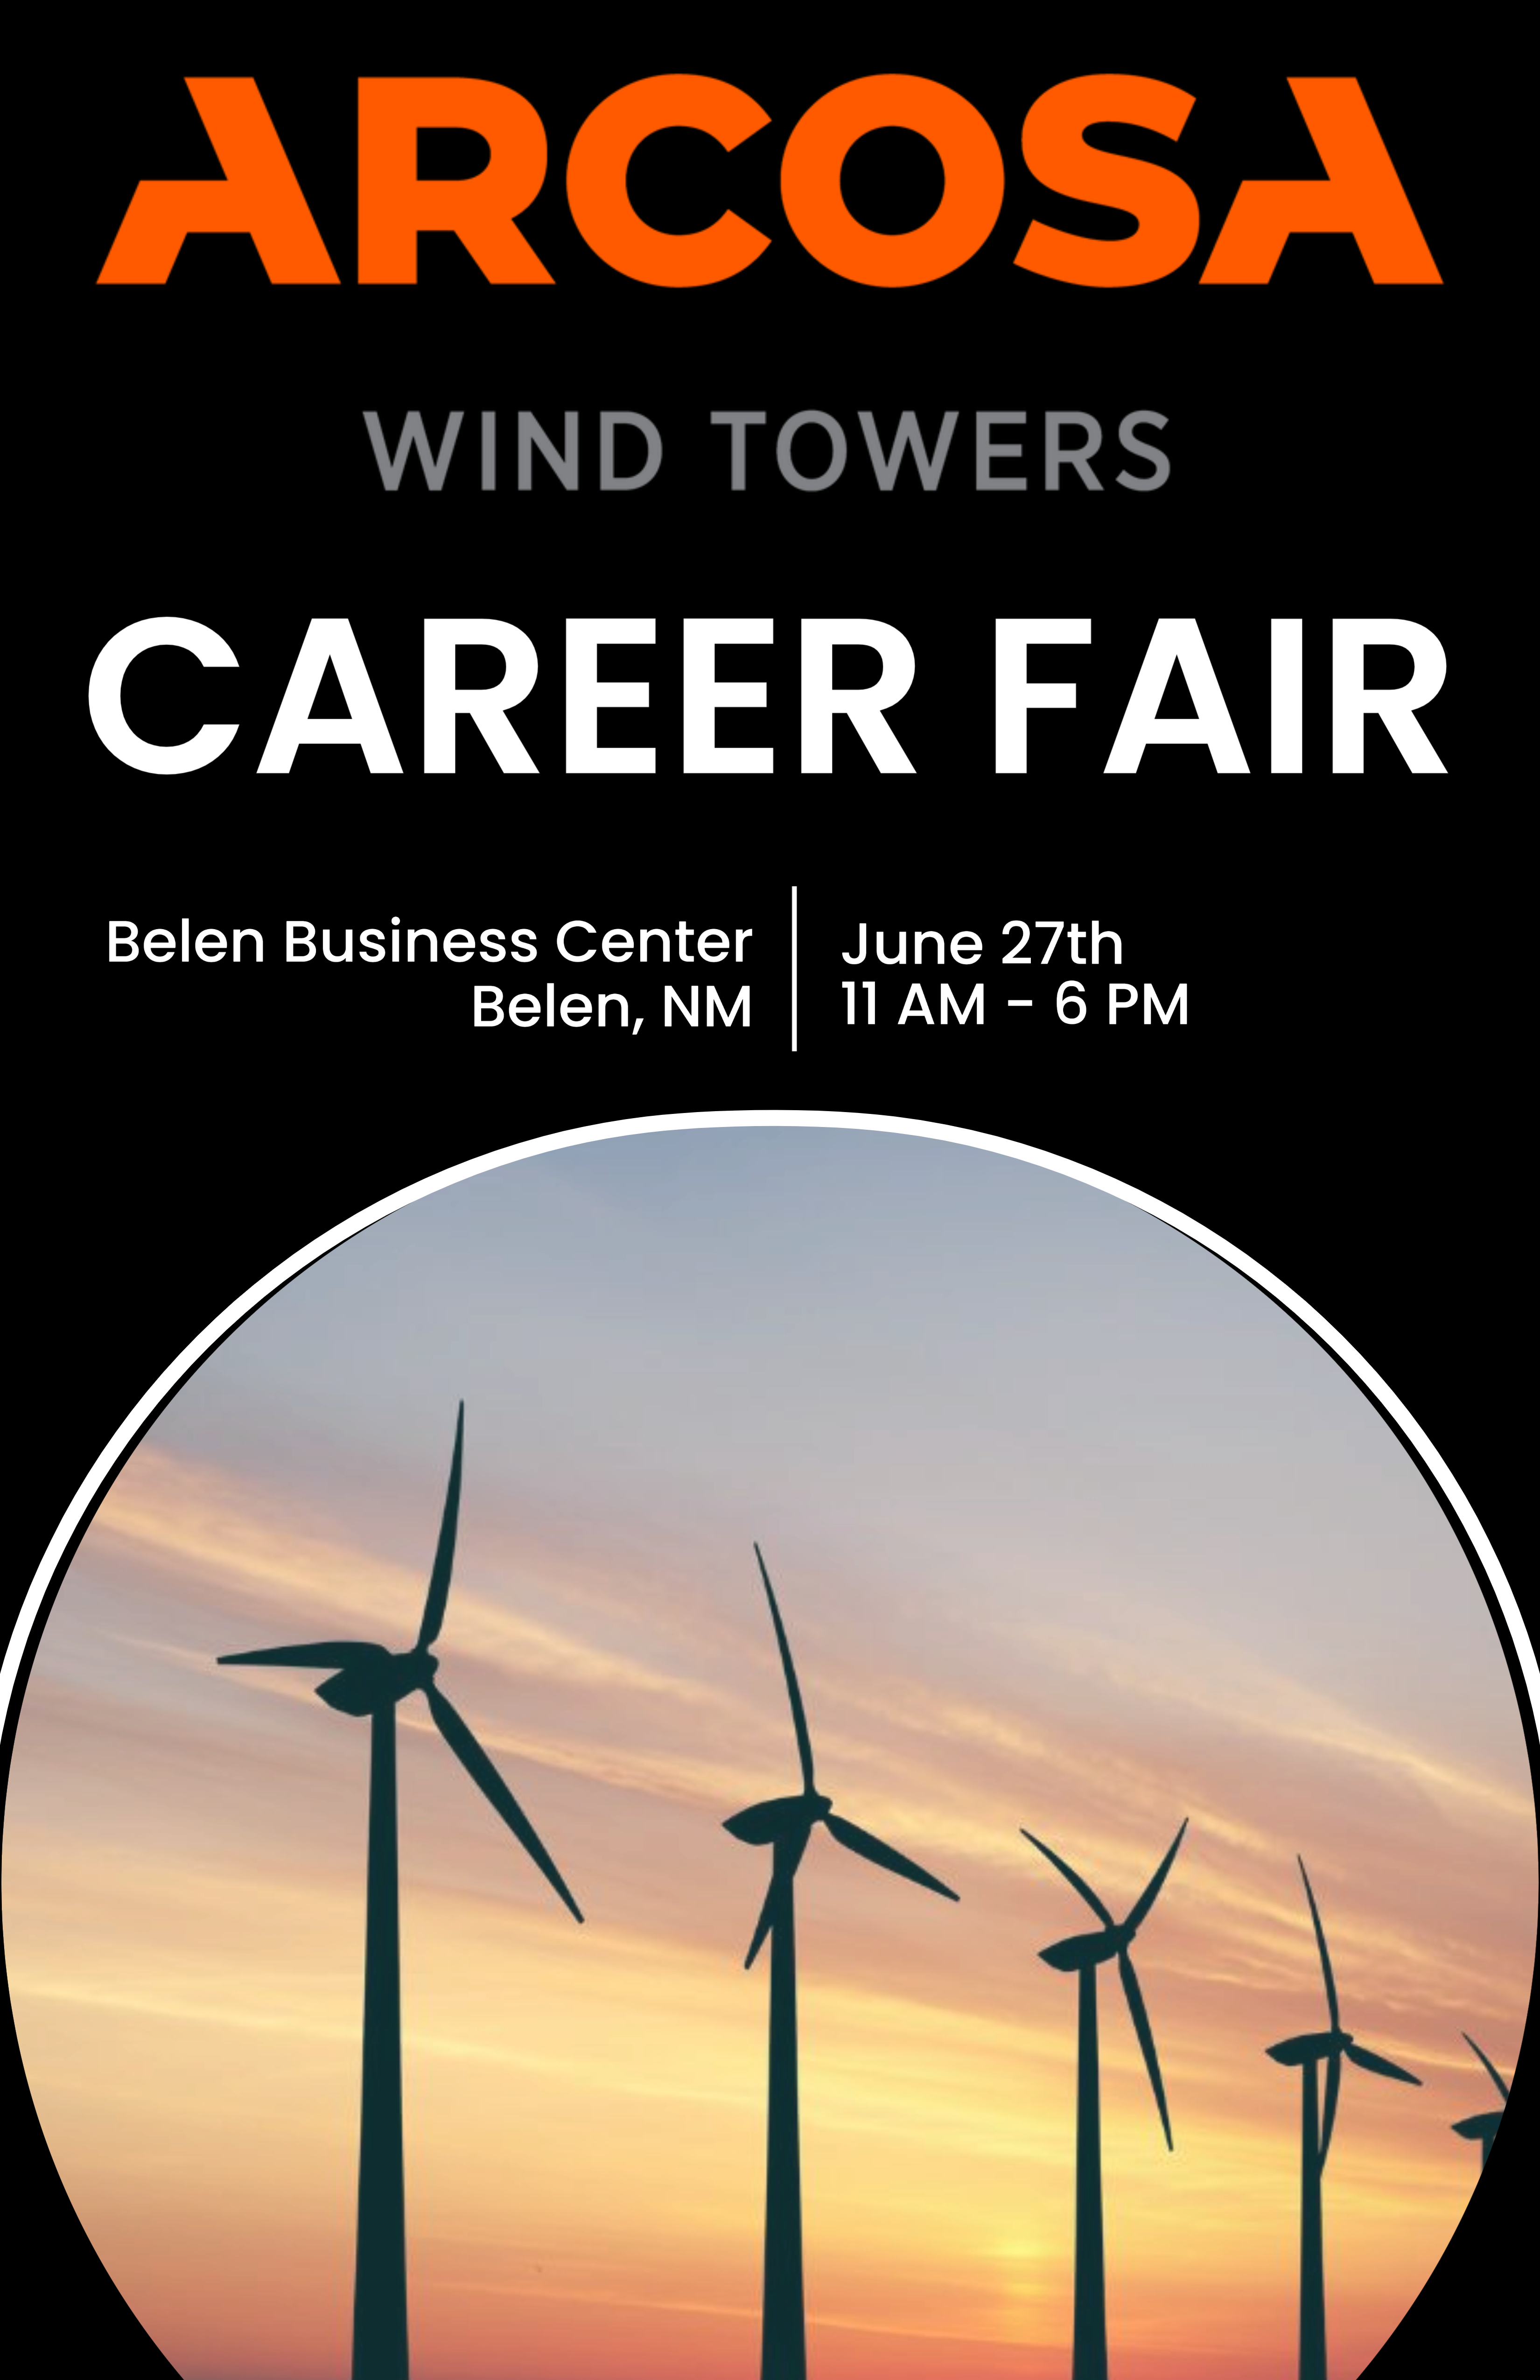 Featured image for “Arcosa Wind Towers’ Career Fair”